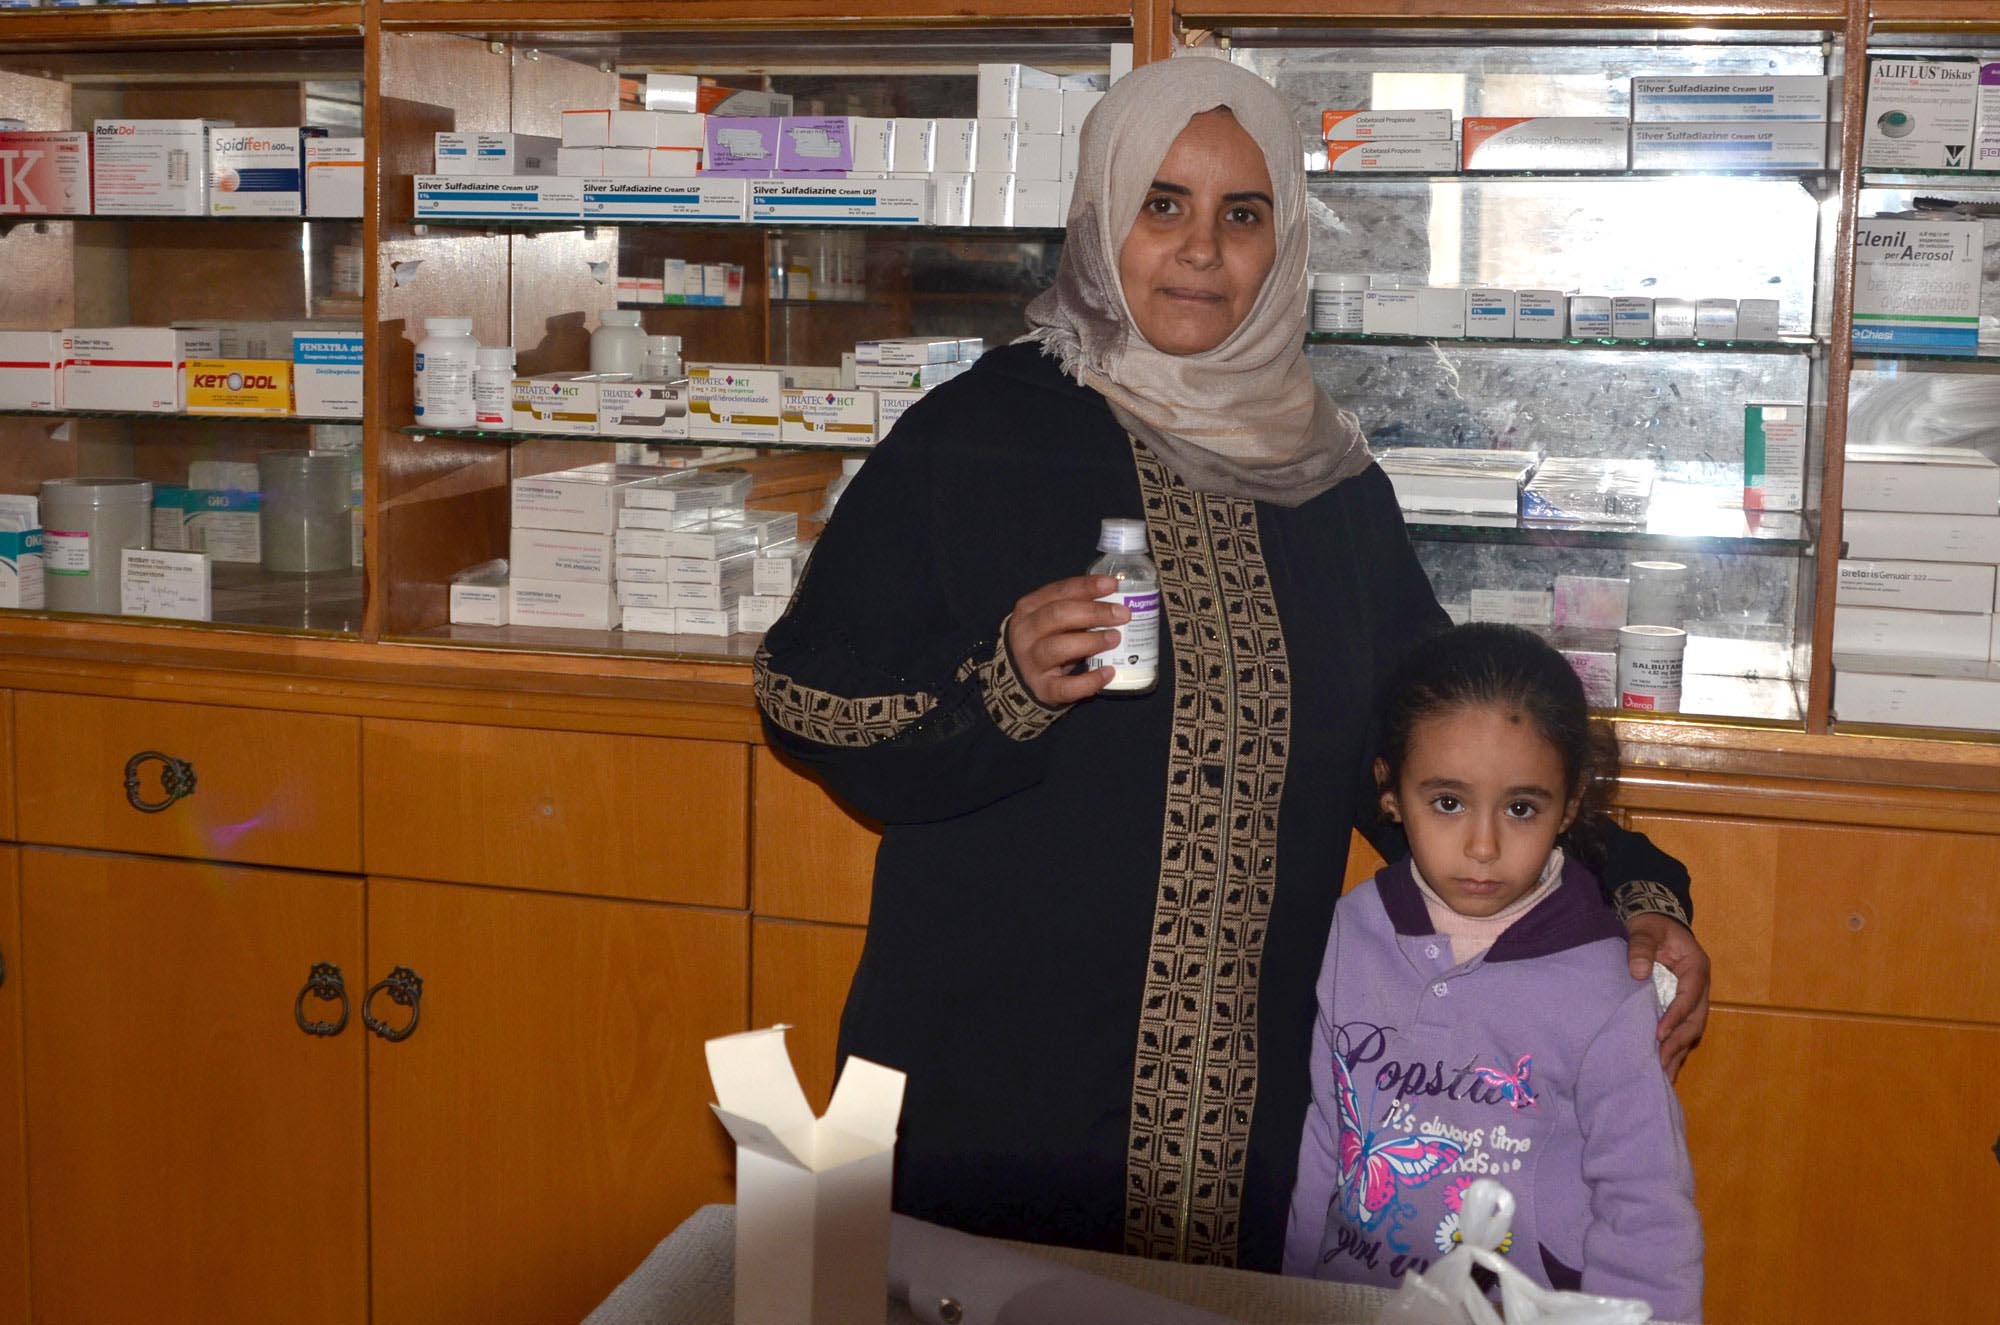 Madline and her daughter Lama came to the Gaza family clinic when Lama's fever worsened.